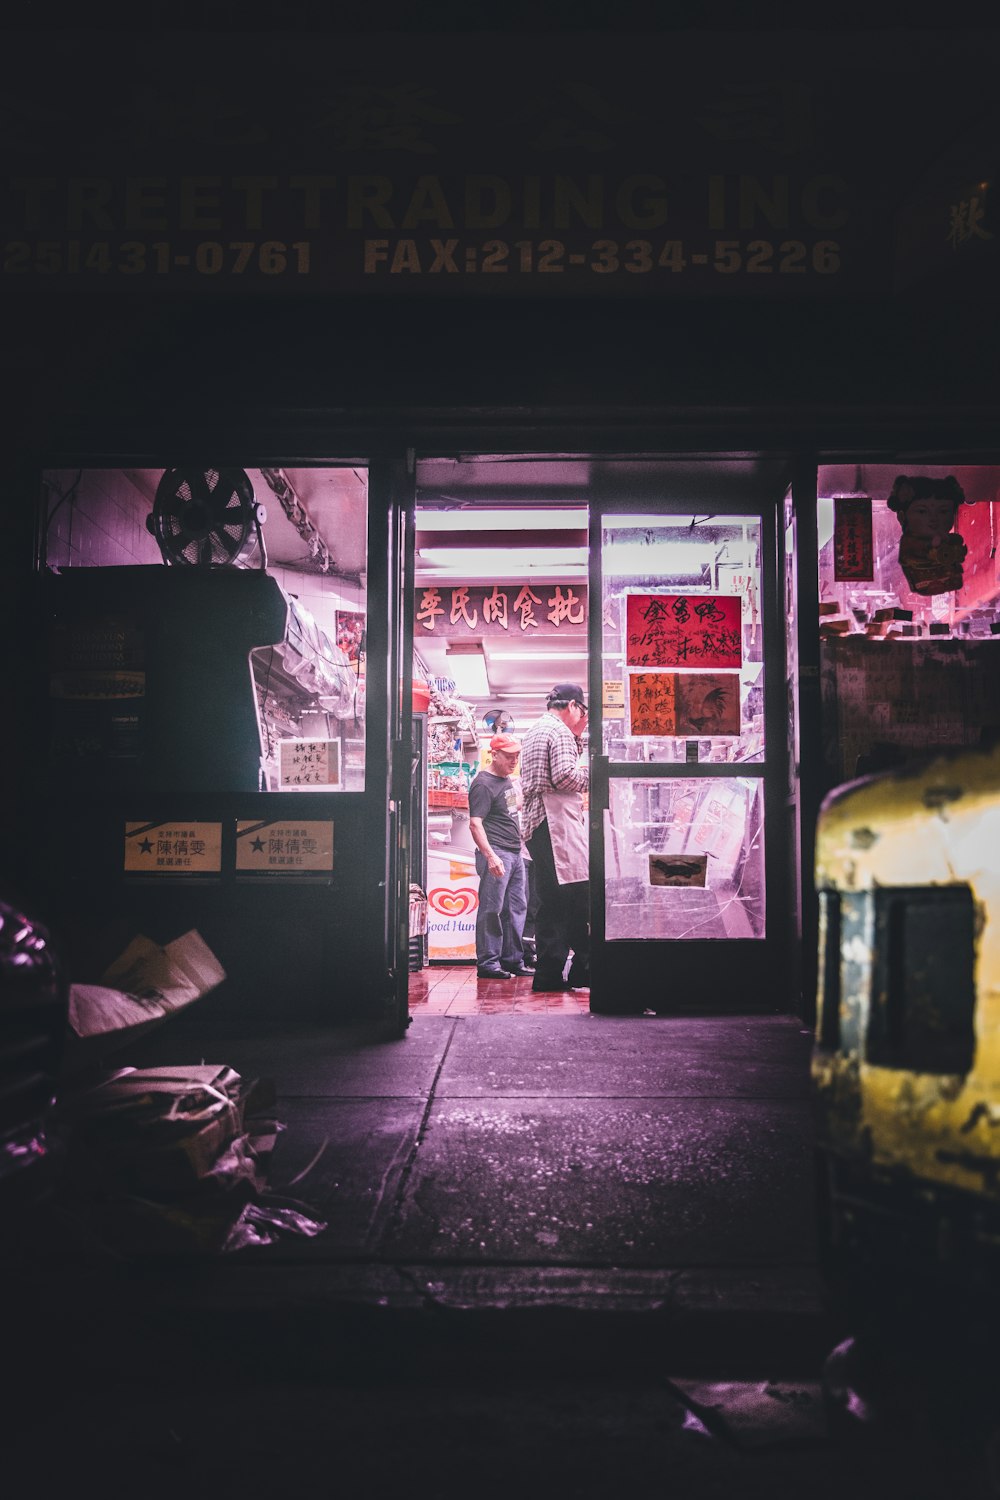 two man standing inside store during nighttime